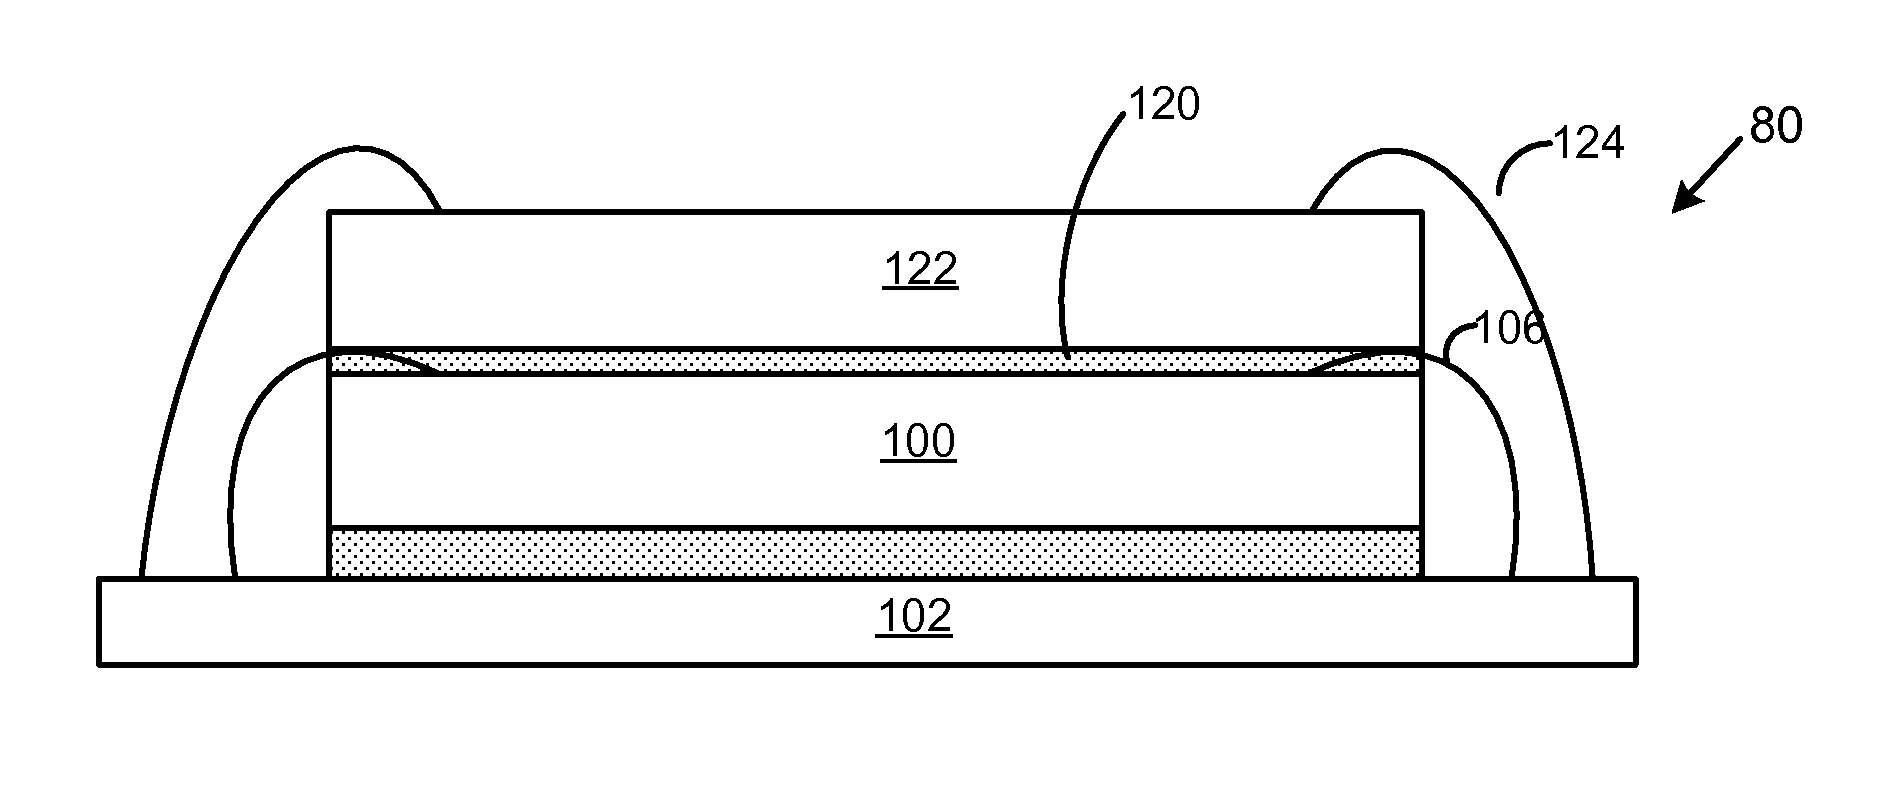 Die stacking using insulated wire bonds